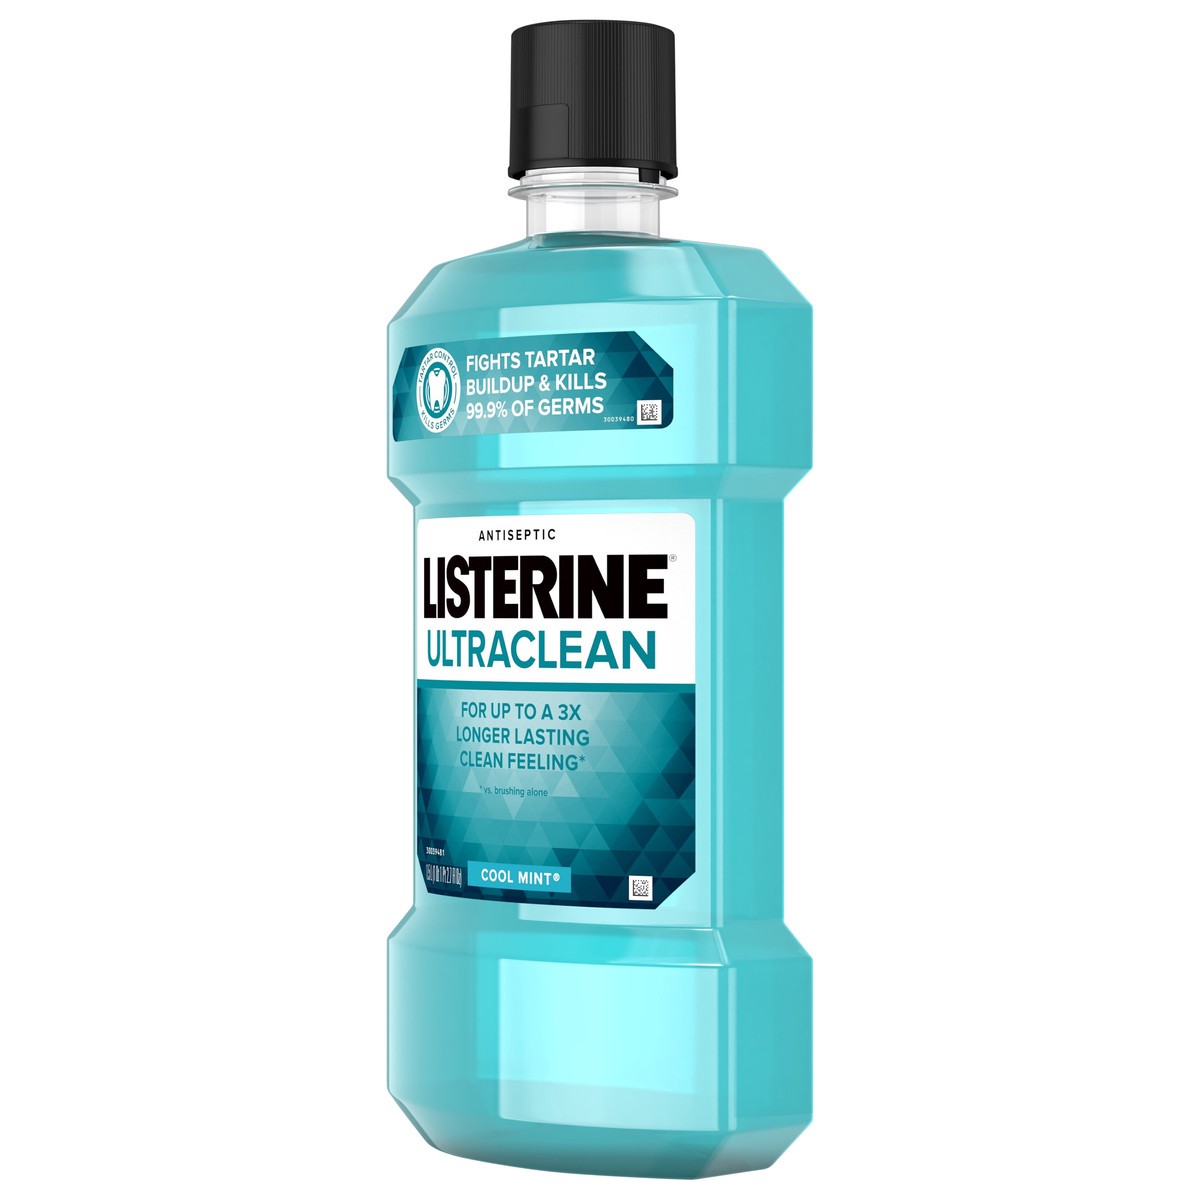 slide 3 of 7, Listerine Ultraclean Oral Care Antiseptic Mouthwash, Everfresh Technology to Help Fight Bad Breath, Gingivitis, Plaque & Tartar, ADA-Accepted Tartar Control Oral Rinse, Cool Mint, 1.5 L, 1.50 liter